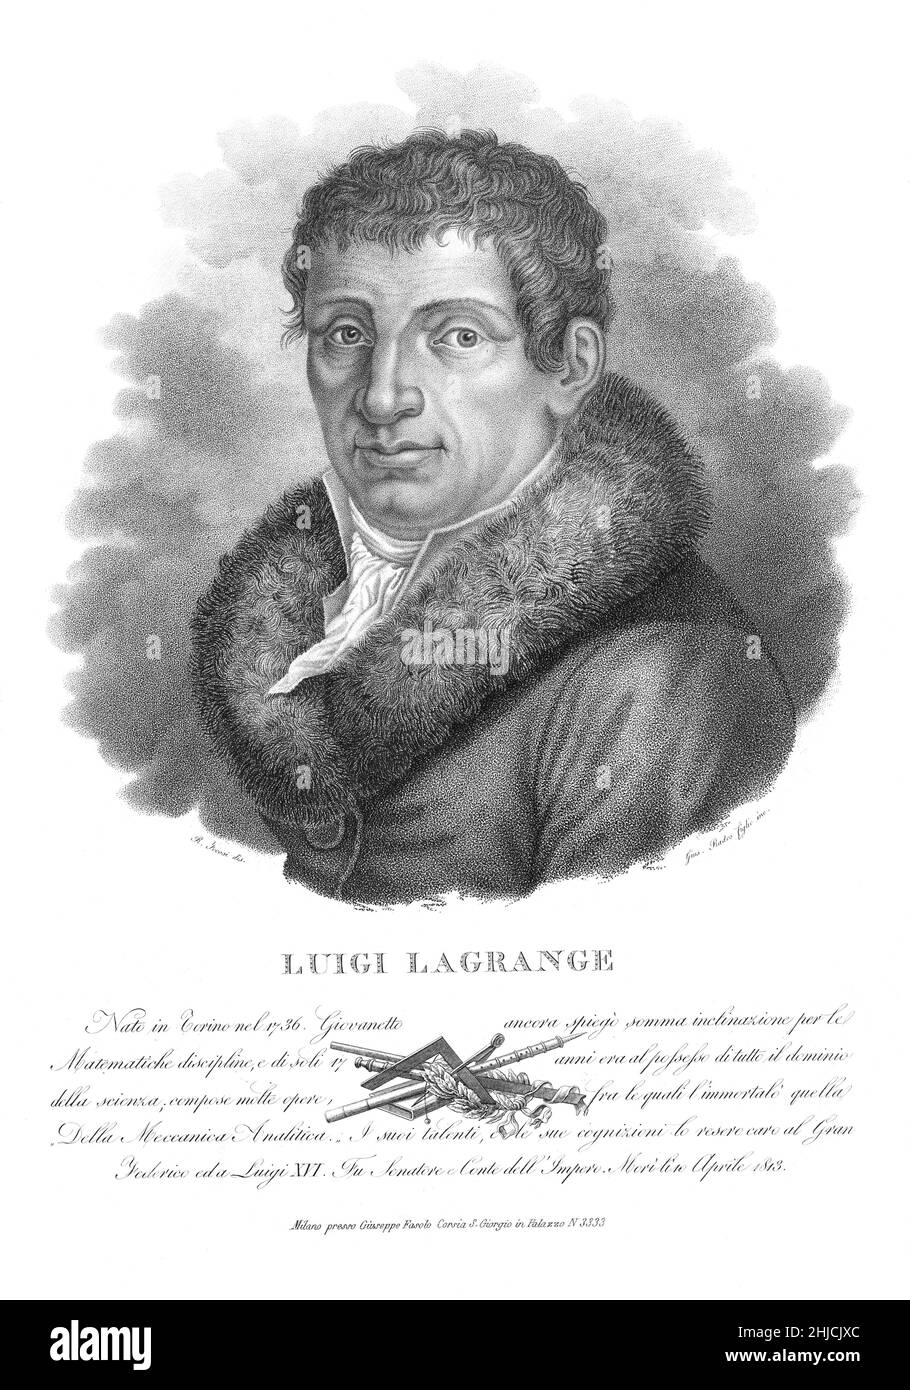 Joseph-Louis Lagrange (1736-1813), also known as Giuseppe Luigi Lagrangia, Italian-French mathematician and astronomer who made significant contributions to the fields of analysis, number theory, and both classical and celestial mechanics. Stipple etching and engraving by Luigi Rados (1773-1840) after a drawing by Roberto Focosi, circa 1827. Stock Photo